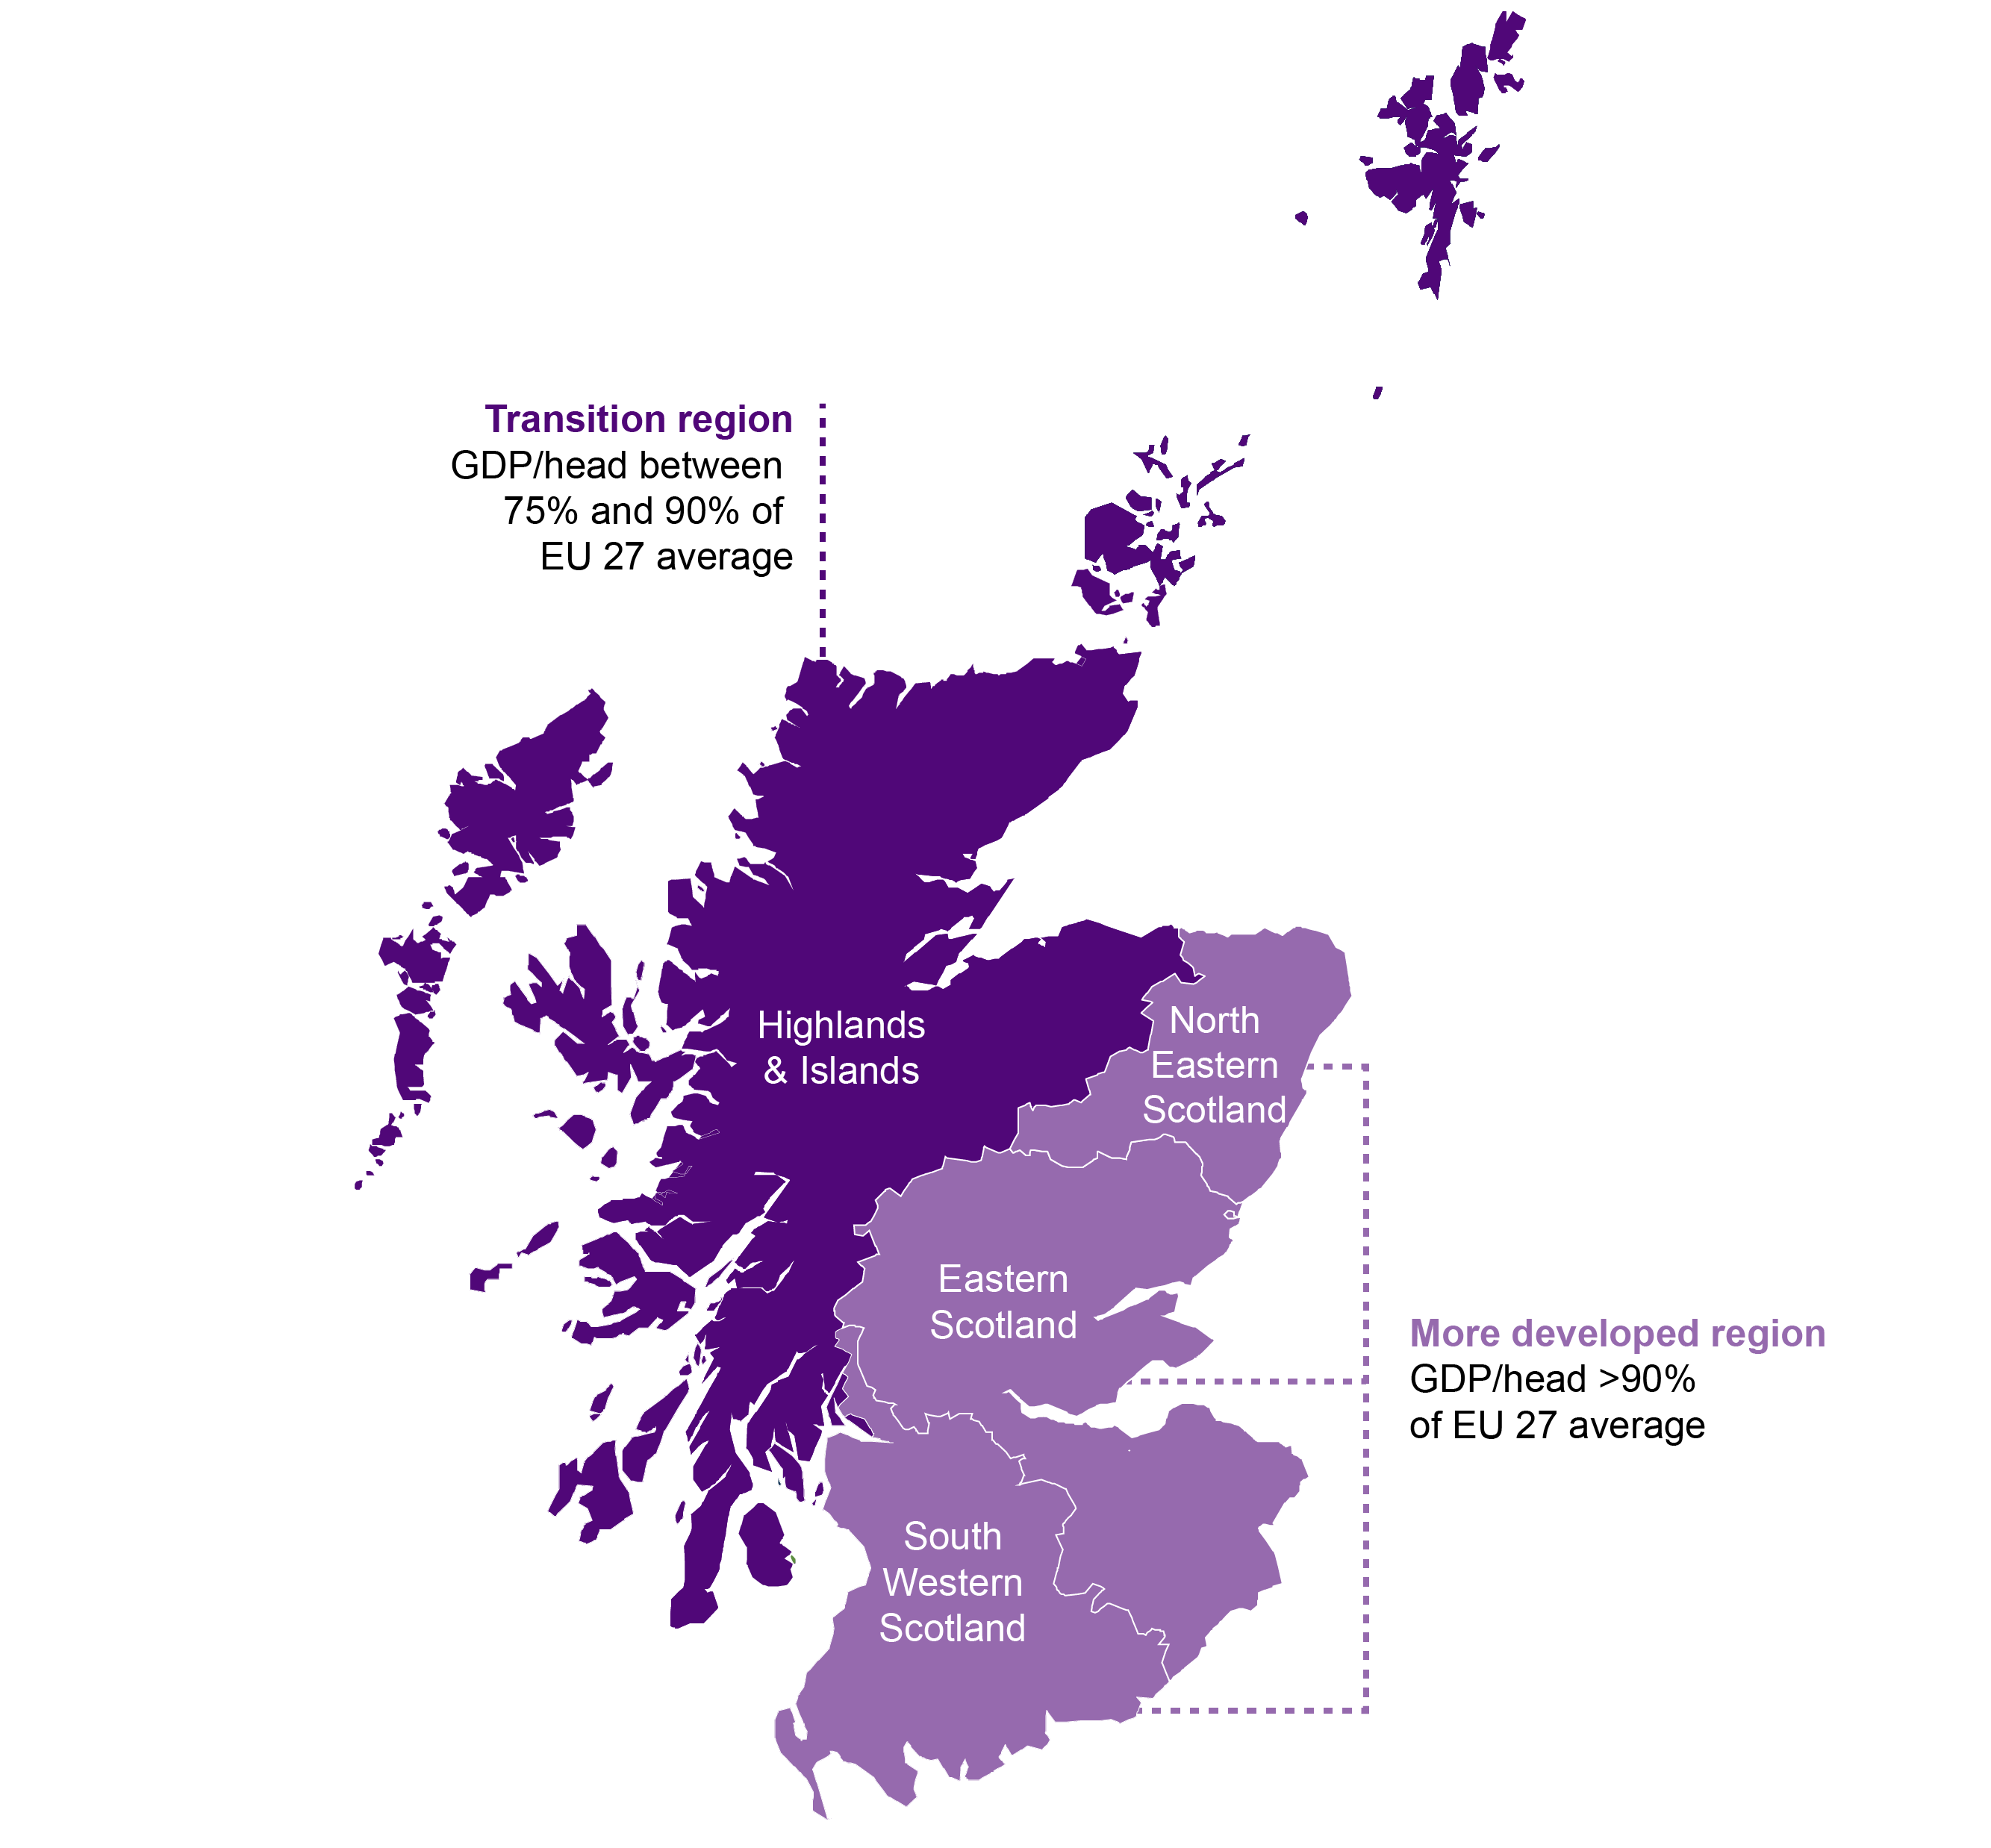 Map of Scotland showing NUTS2 regions for structural funding purposes